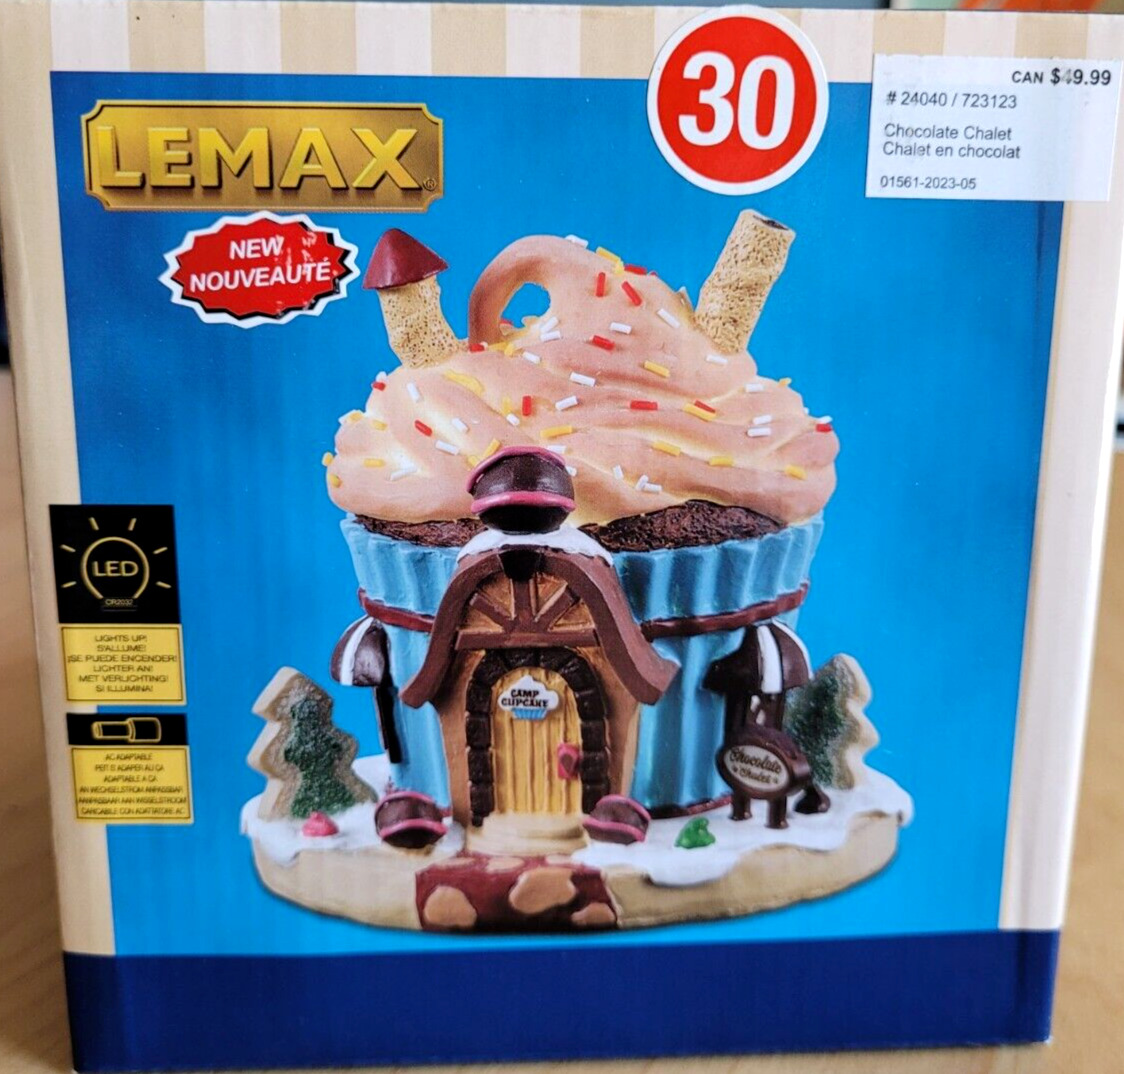 New LED Light-Up Lemax Chocolate Chalet Christmas Camp Cupcake House #24040